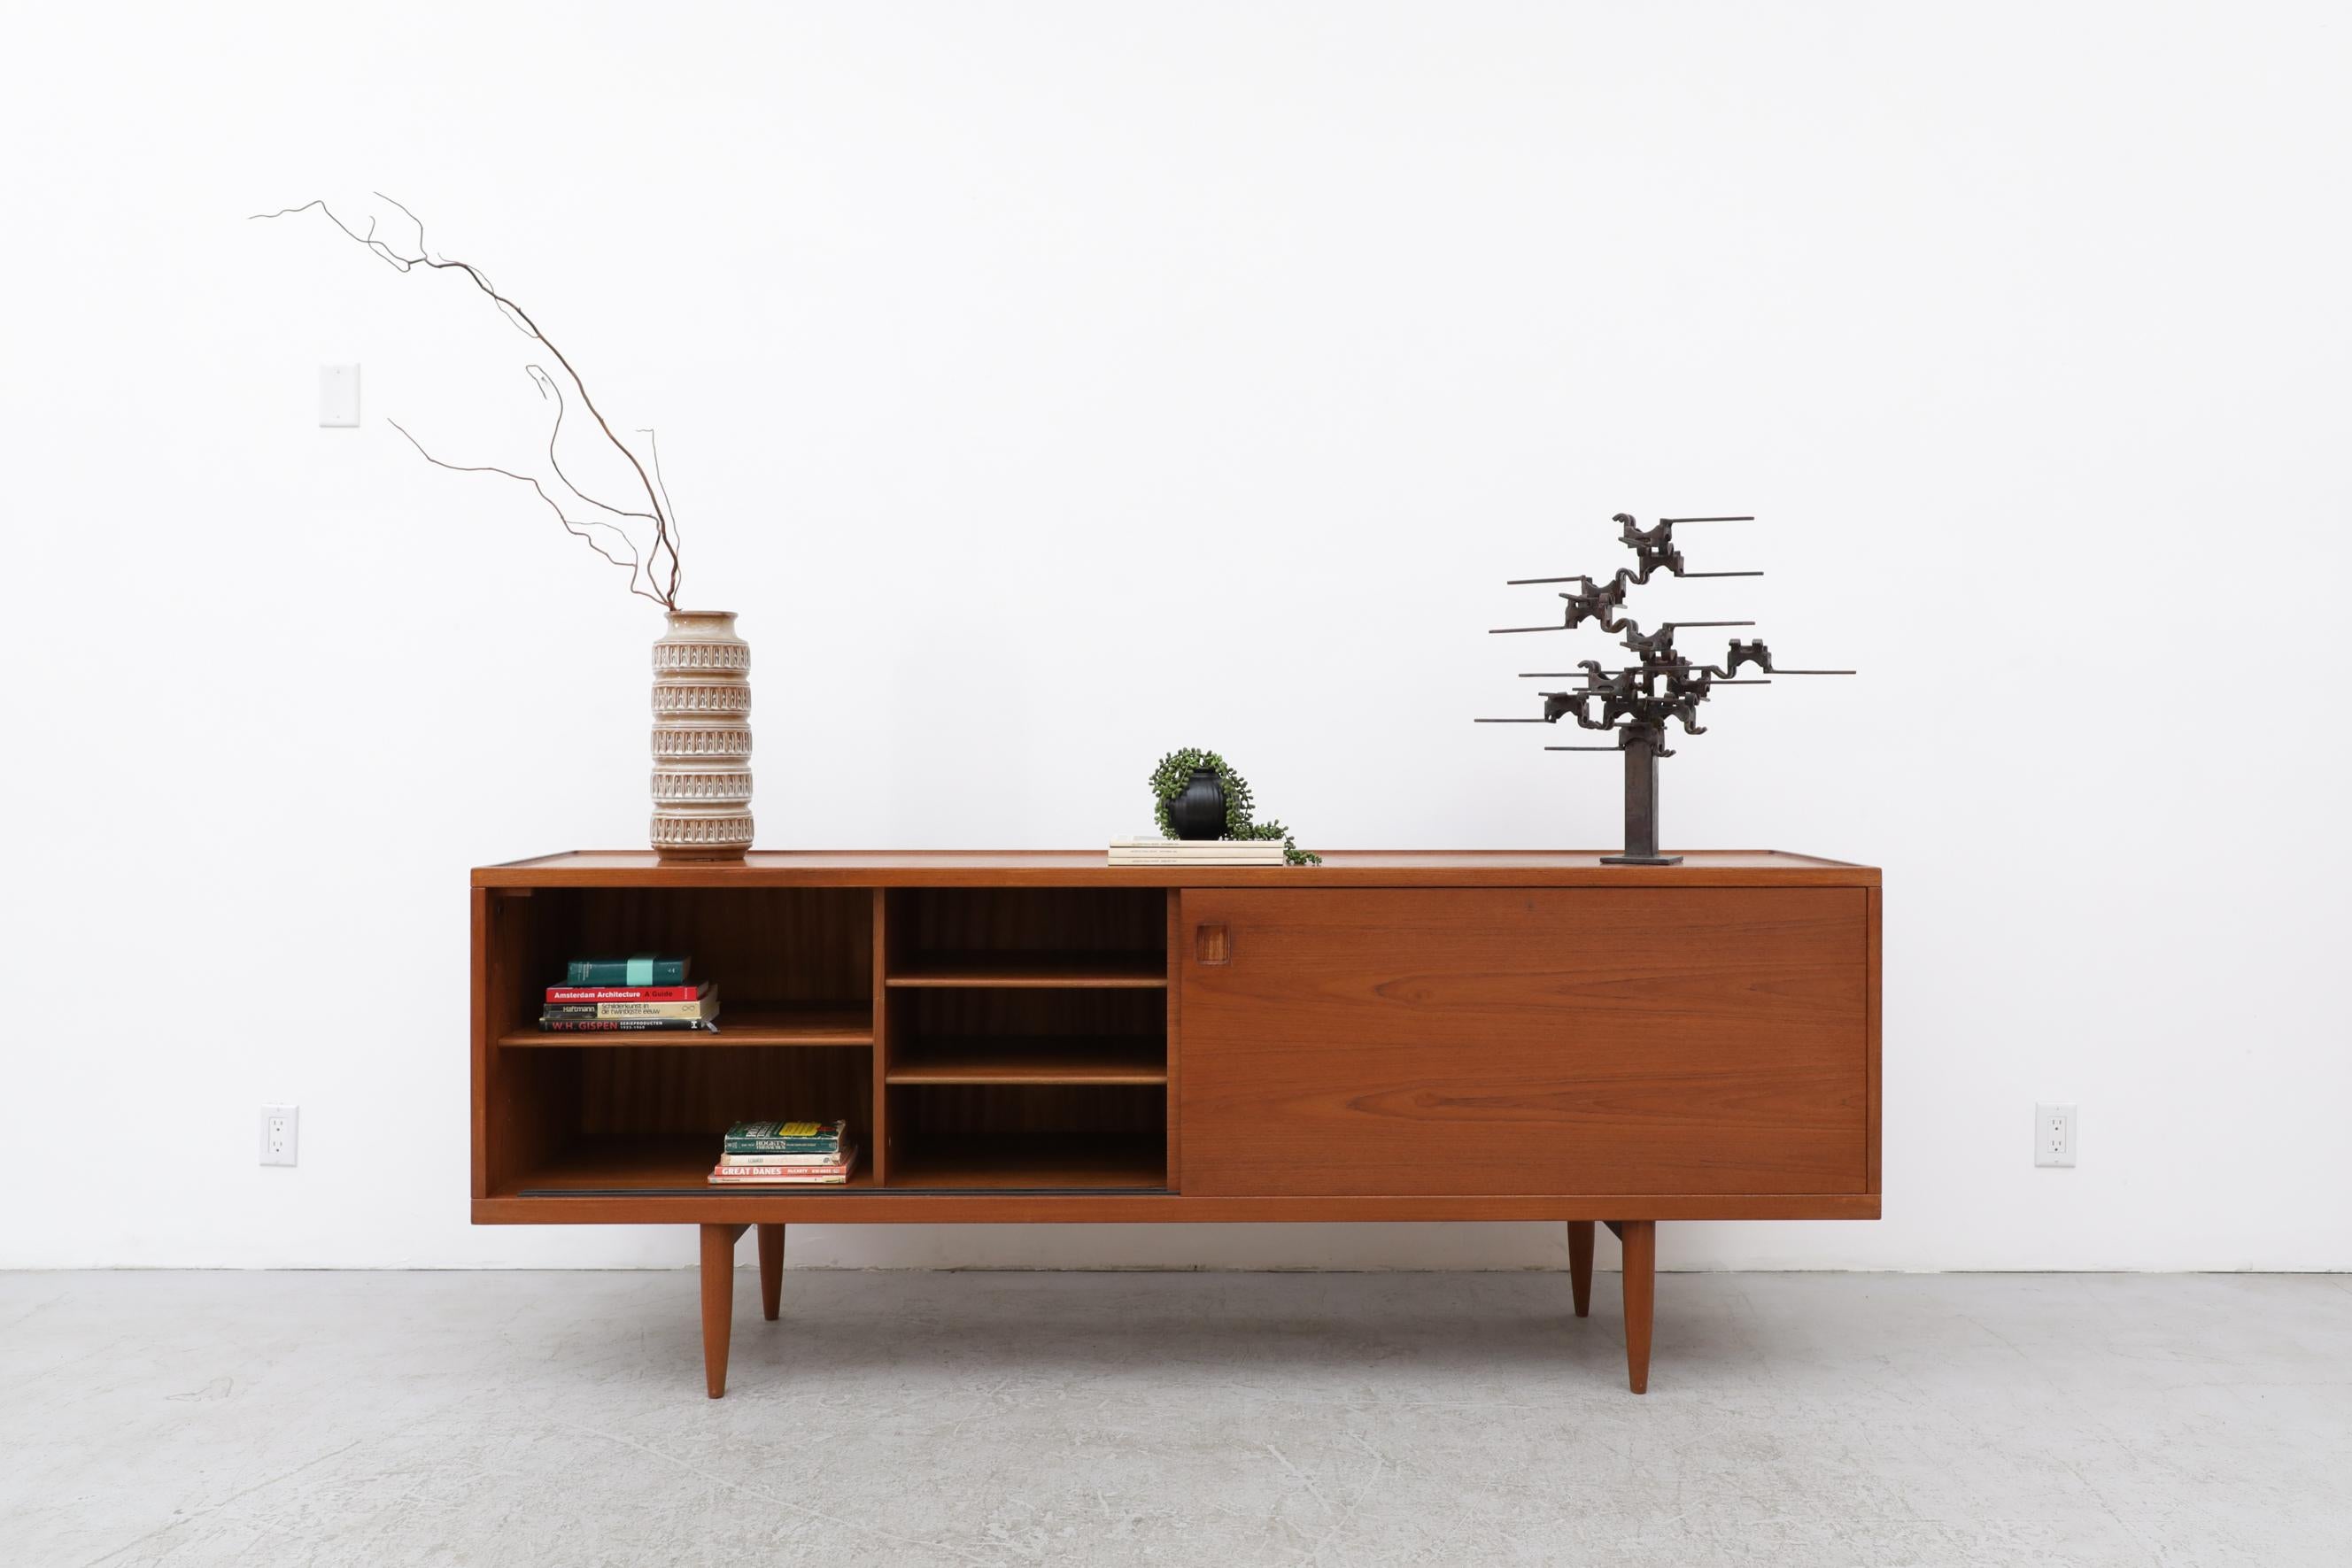 Mid-Century Danish Teak sideboard, Model 20, designed by Niels Moller, 1960's. This sideboard has double sliding doors with matchbook grain. The doors have inset square carved pulls that hide shelving on one side and 2 compartments on the right, one